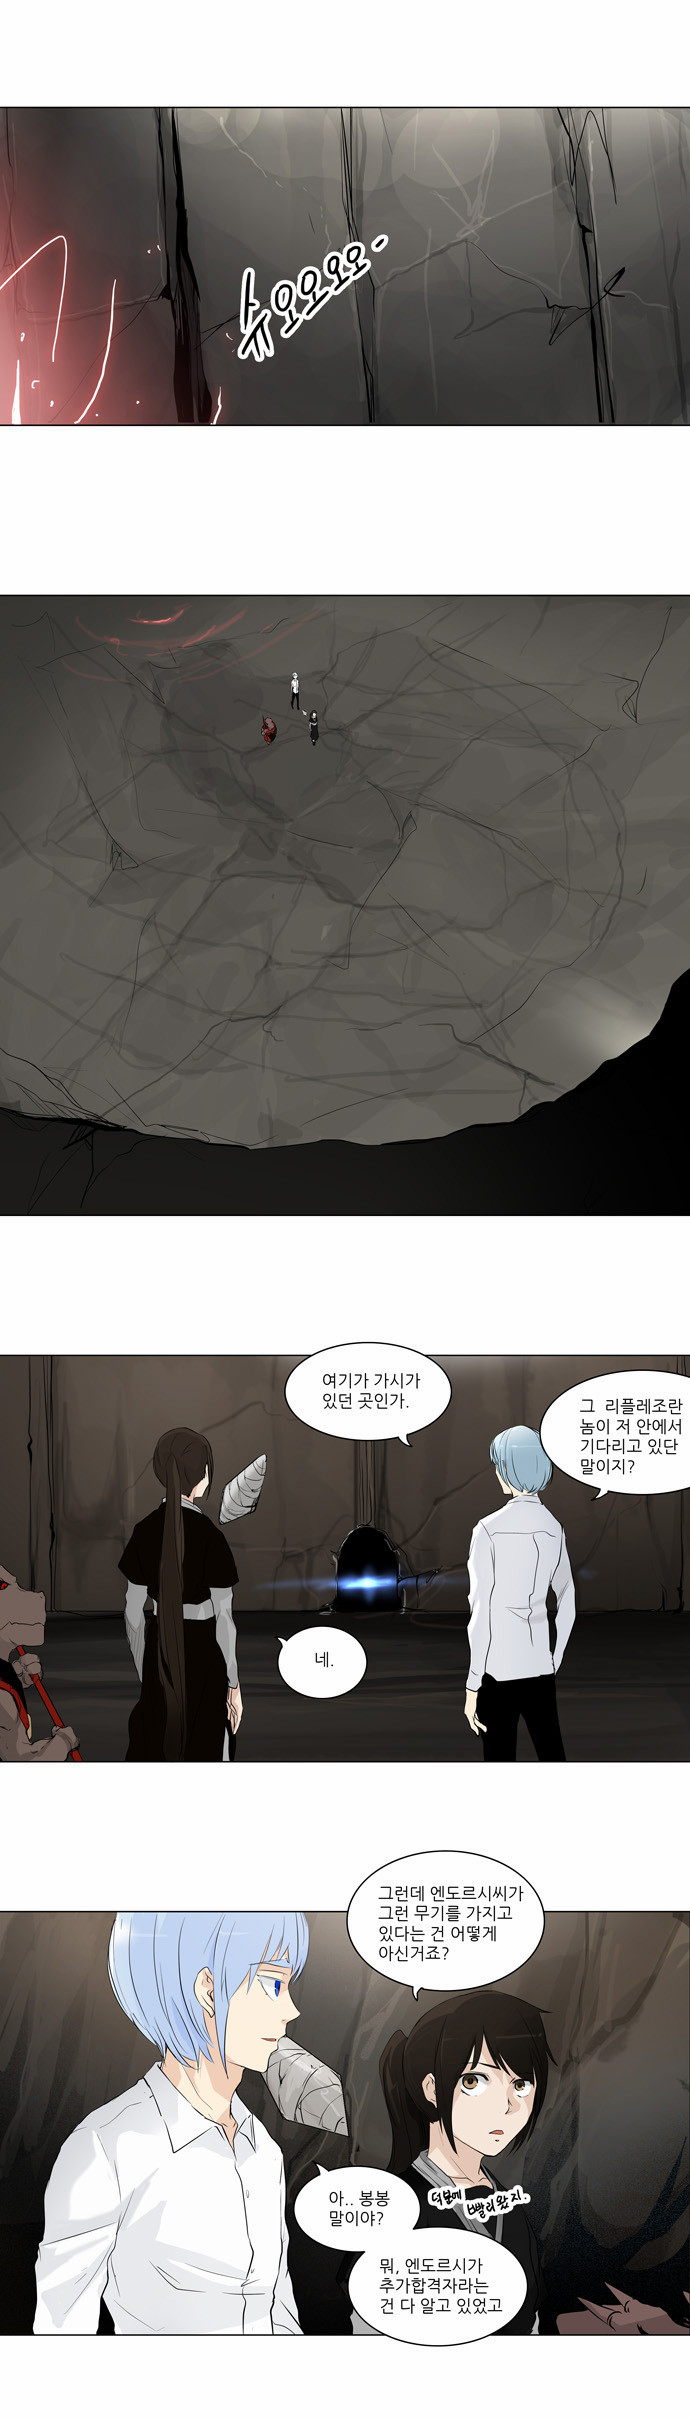 Tower of God - Chapter 181 - Page 1